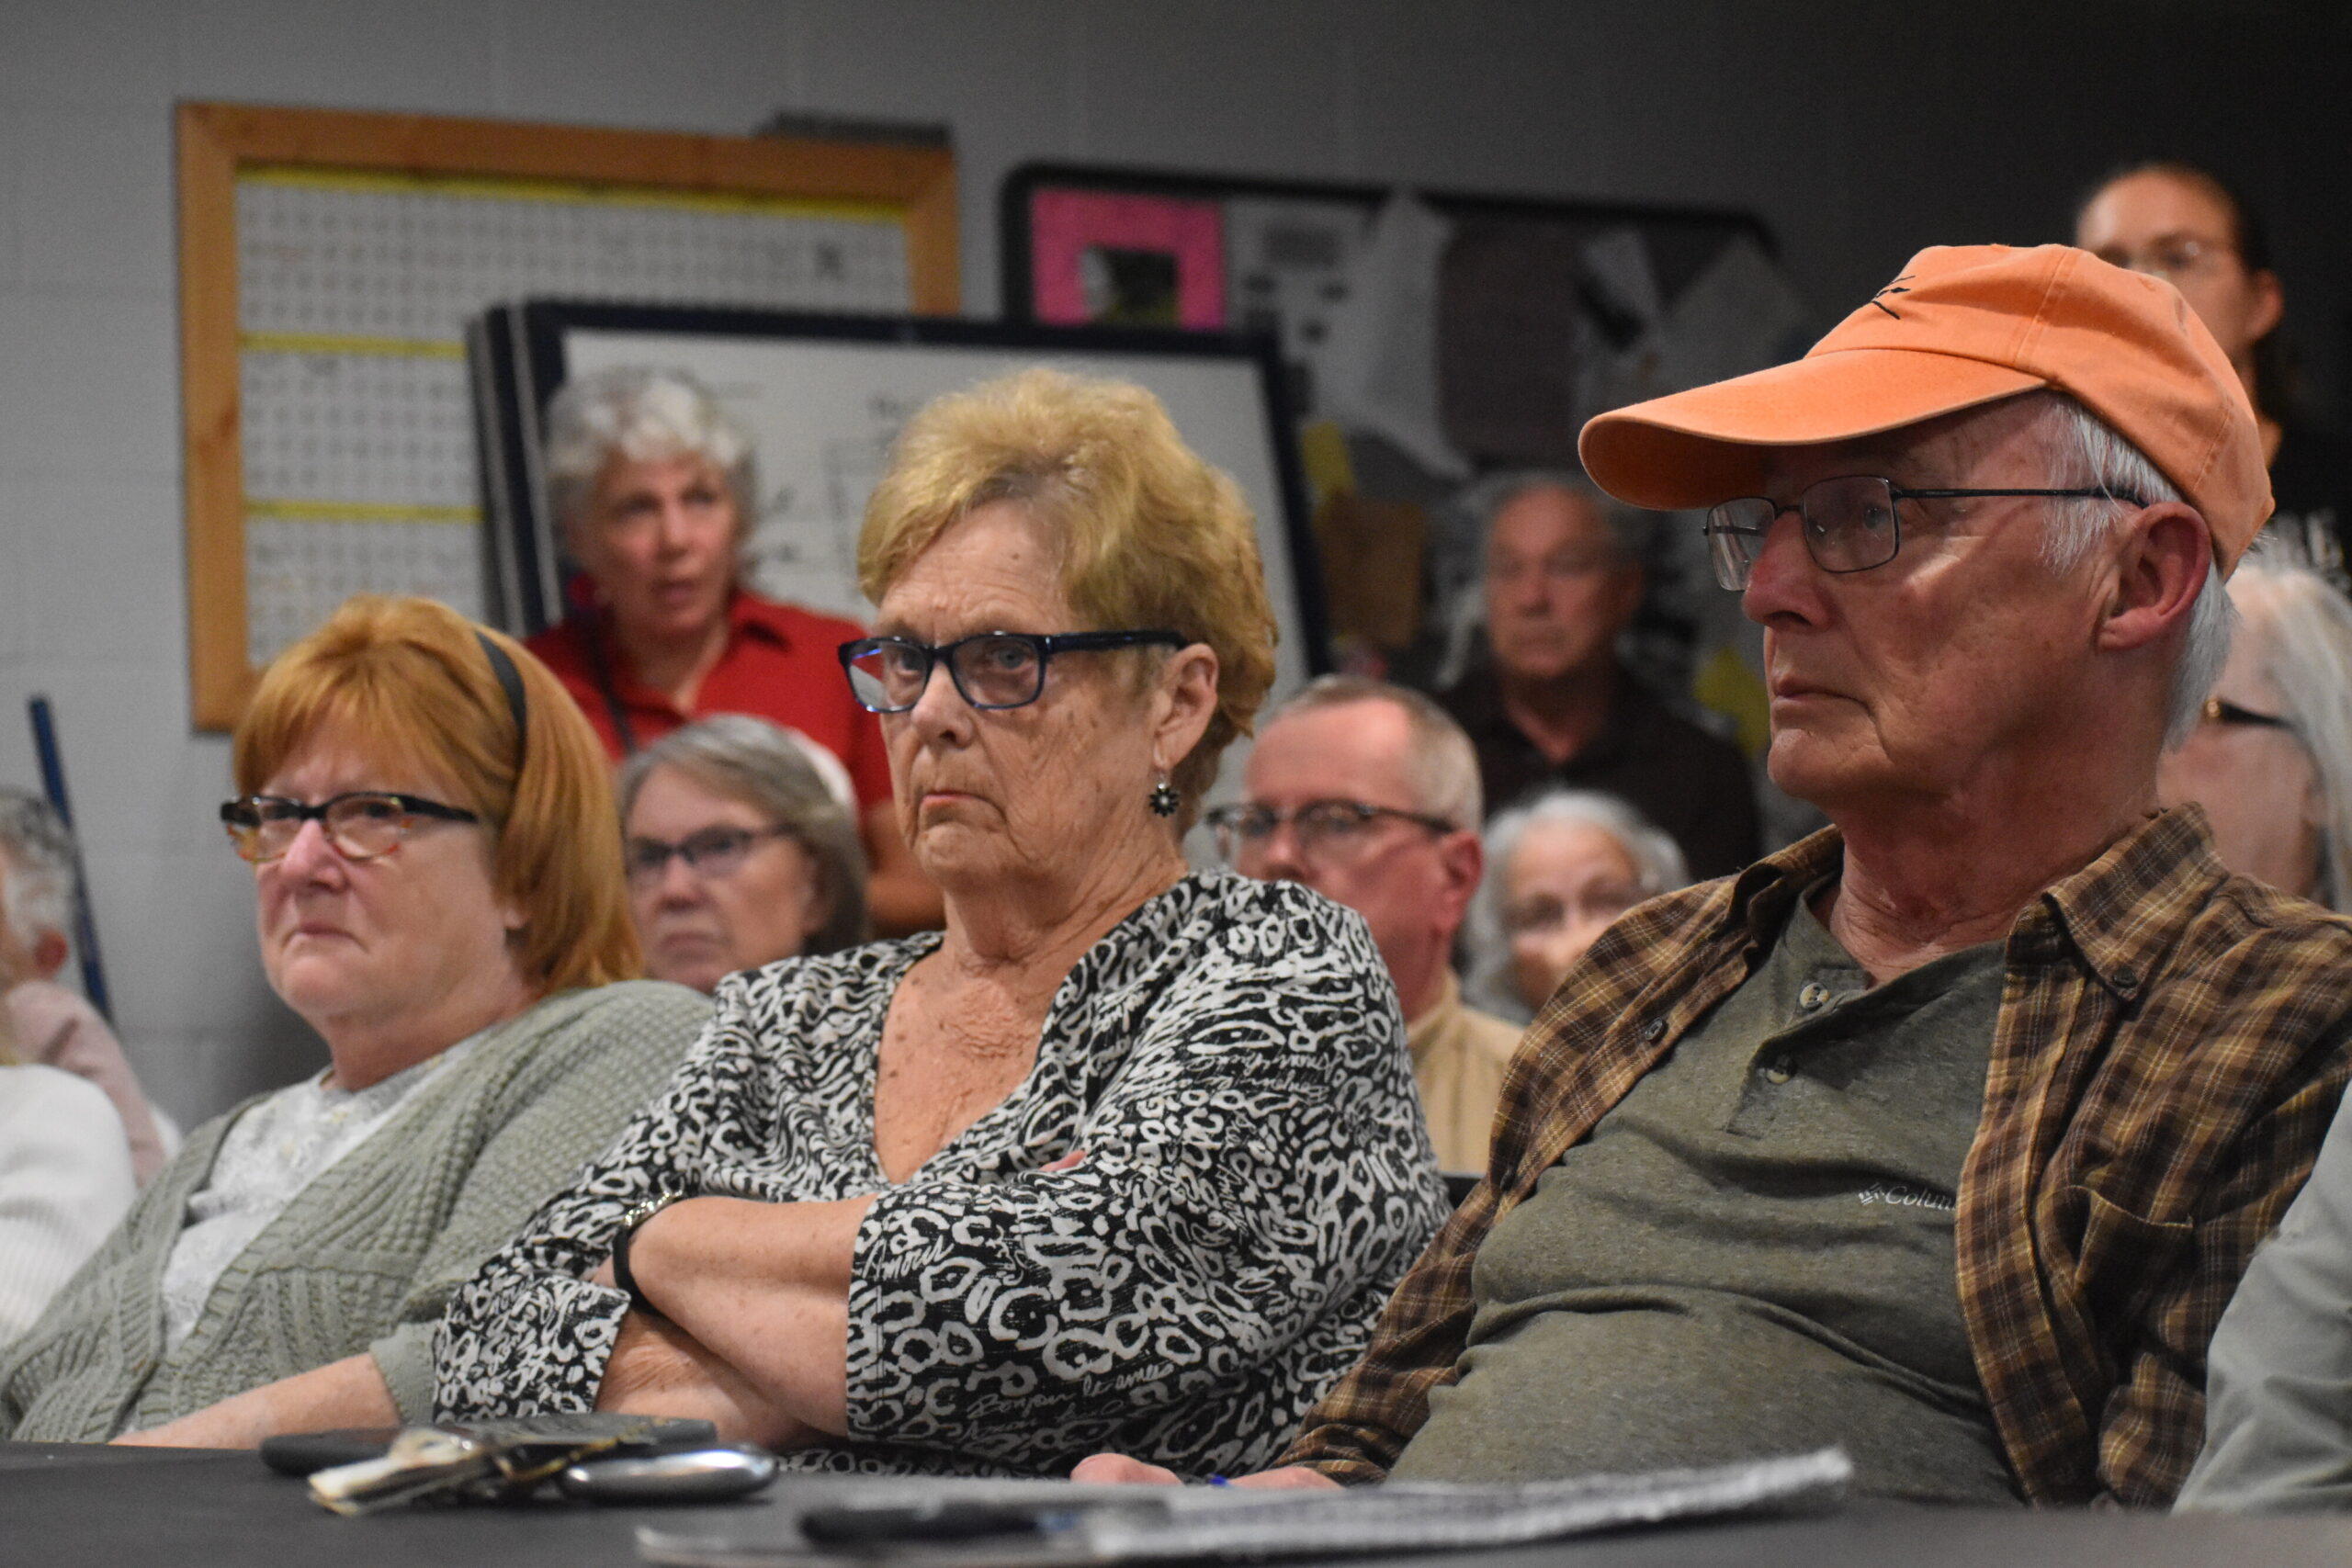 Library board members ousted in Iron River amid controversy over requests to remove books